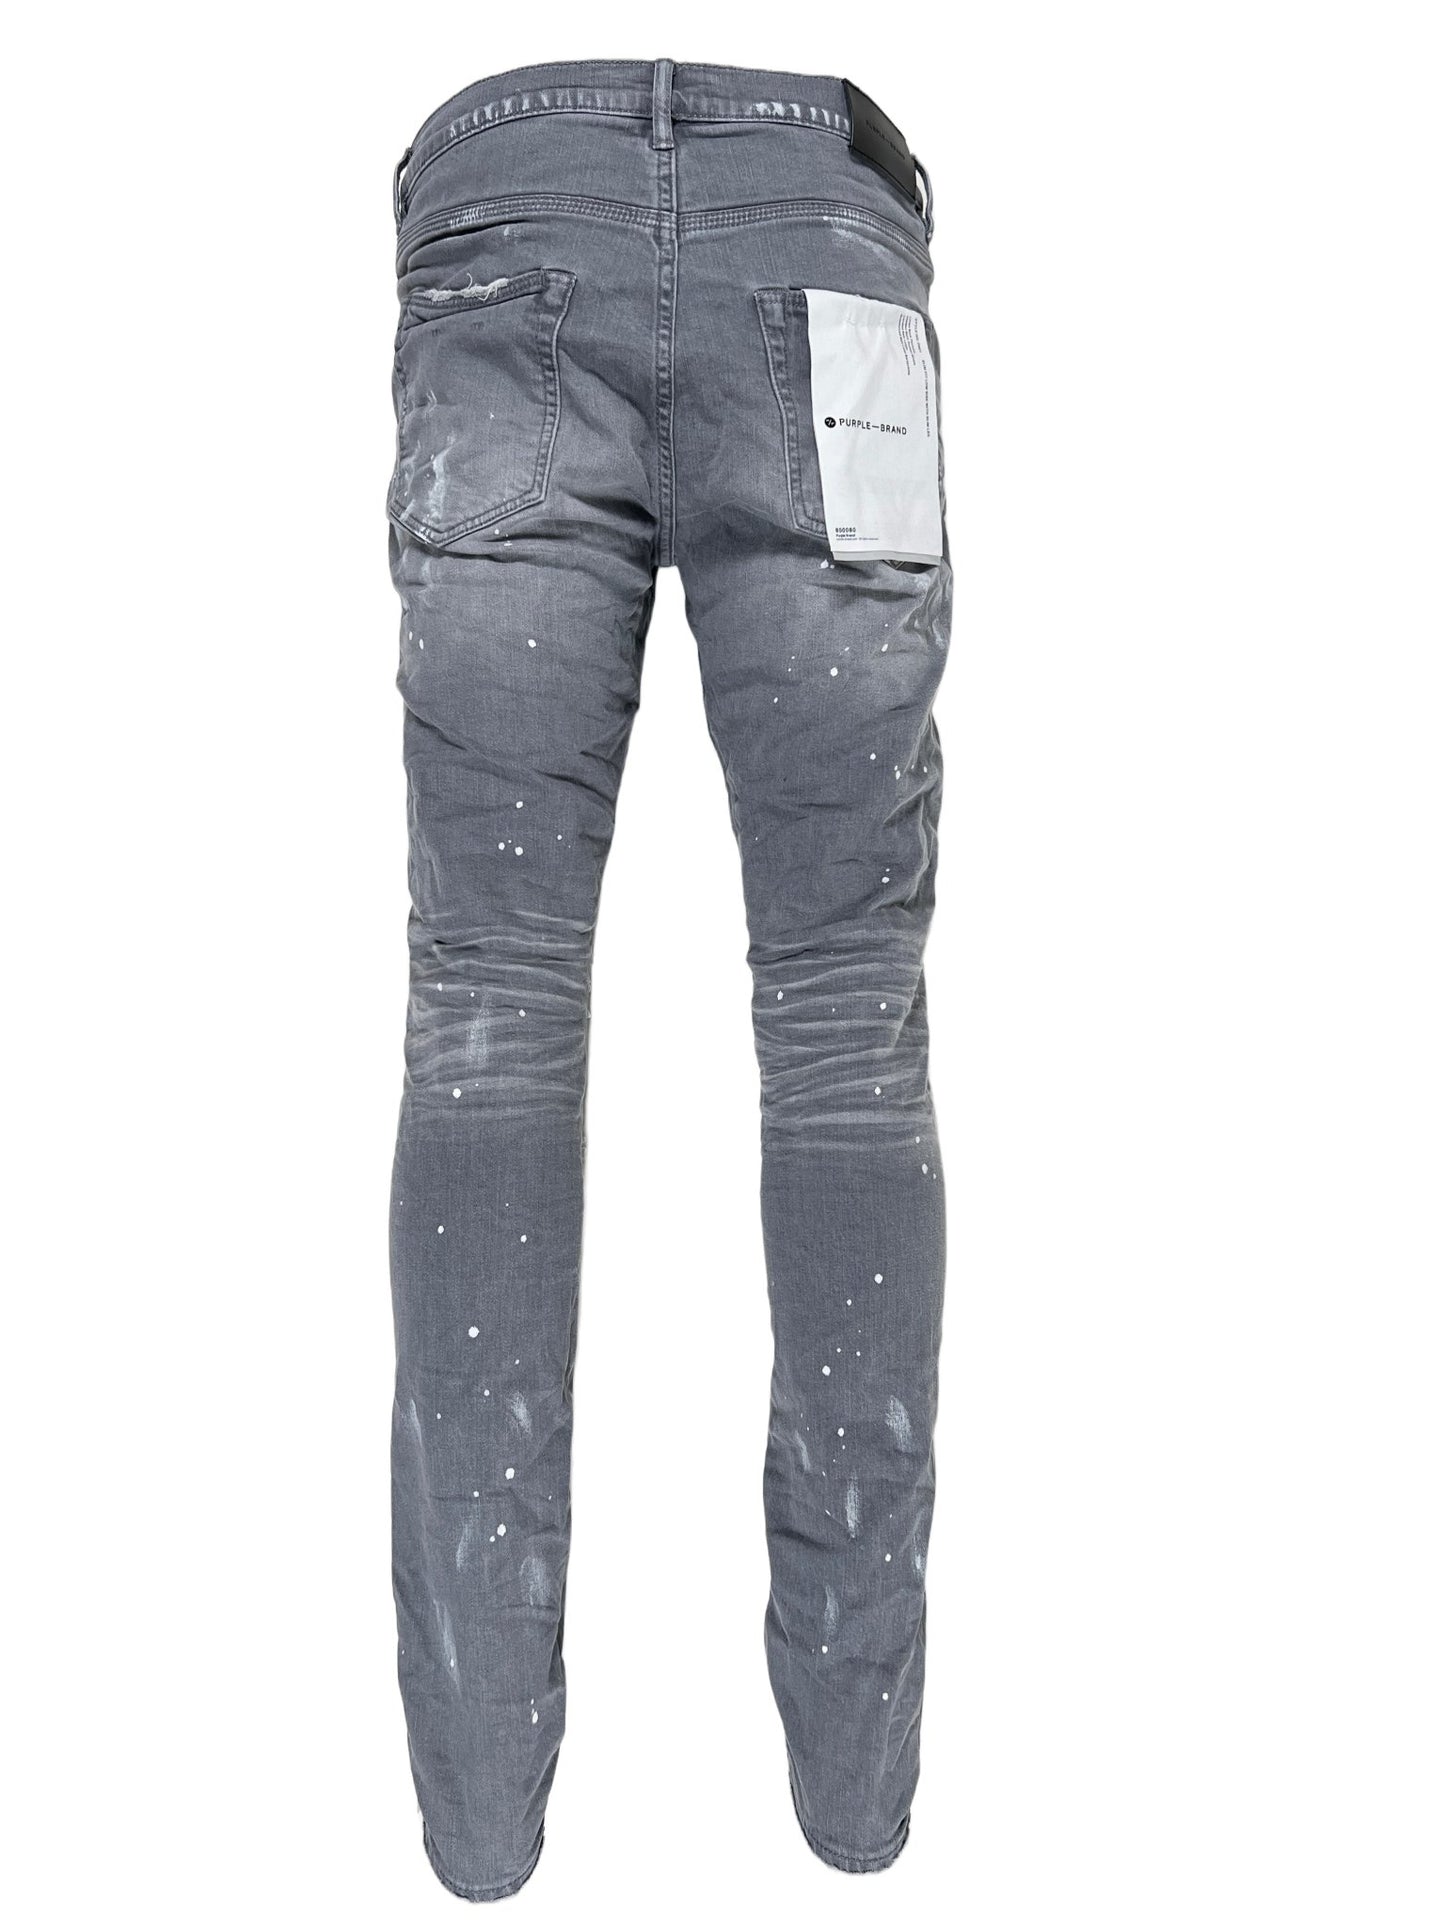 A pair of PURPLE BRAND jeans in P001-WGKS WORN GREY KNEE SLIT with white paint splatters on them, featuring belt loops for added functionality.